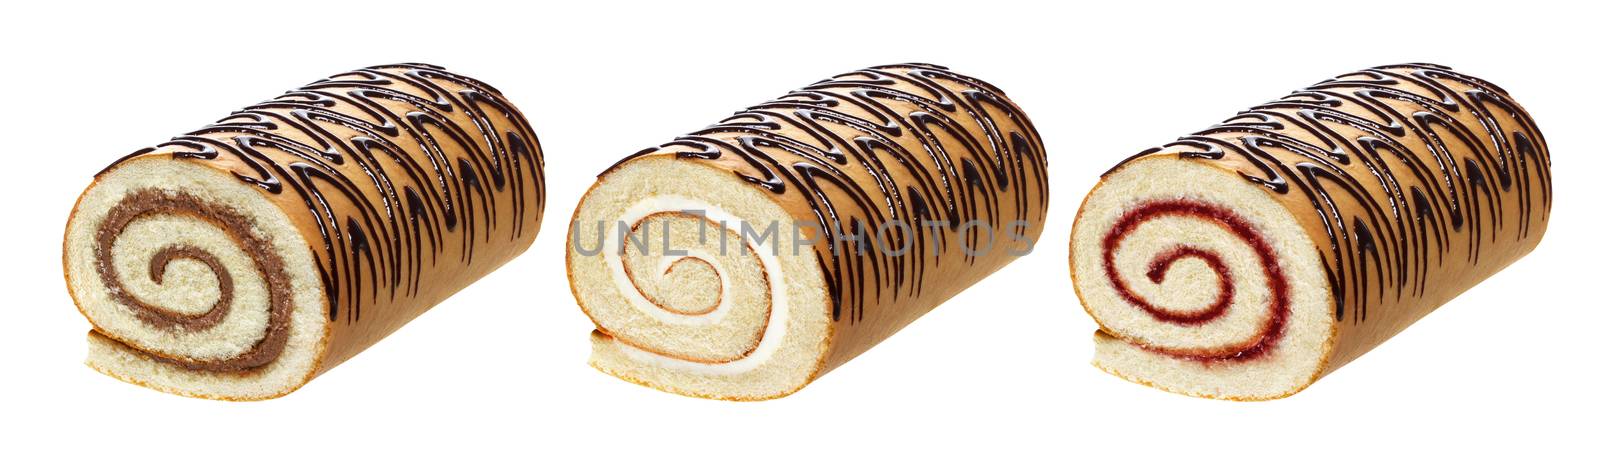 Sponge cake roll isolated on white background, with chocolate, vanilla and berry cream, different swiss rolls collection for use in packaging